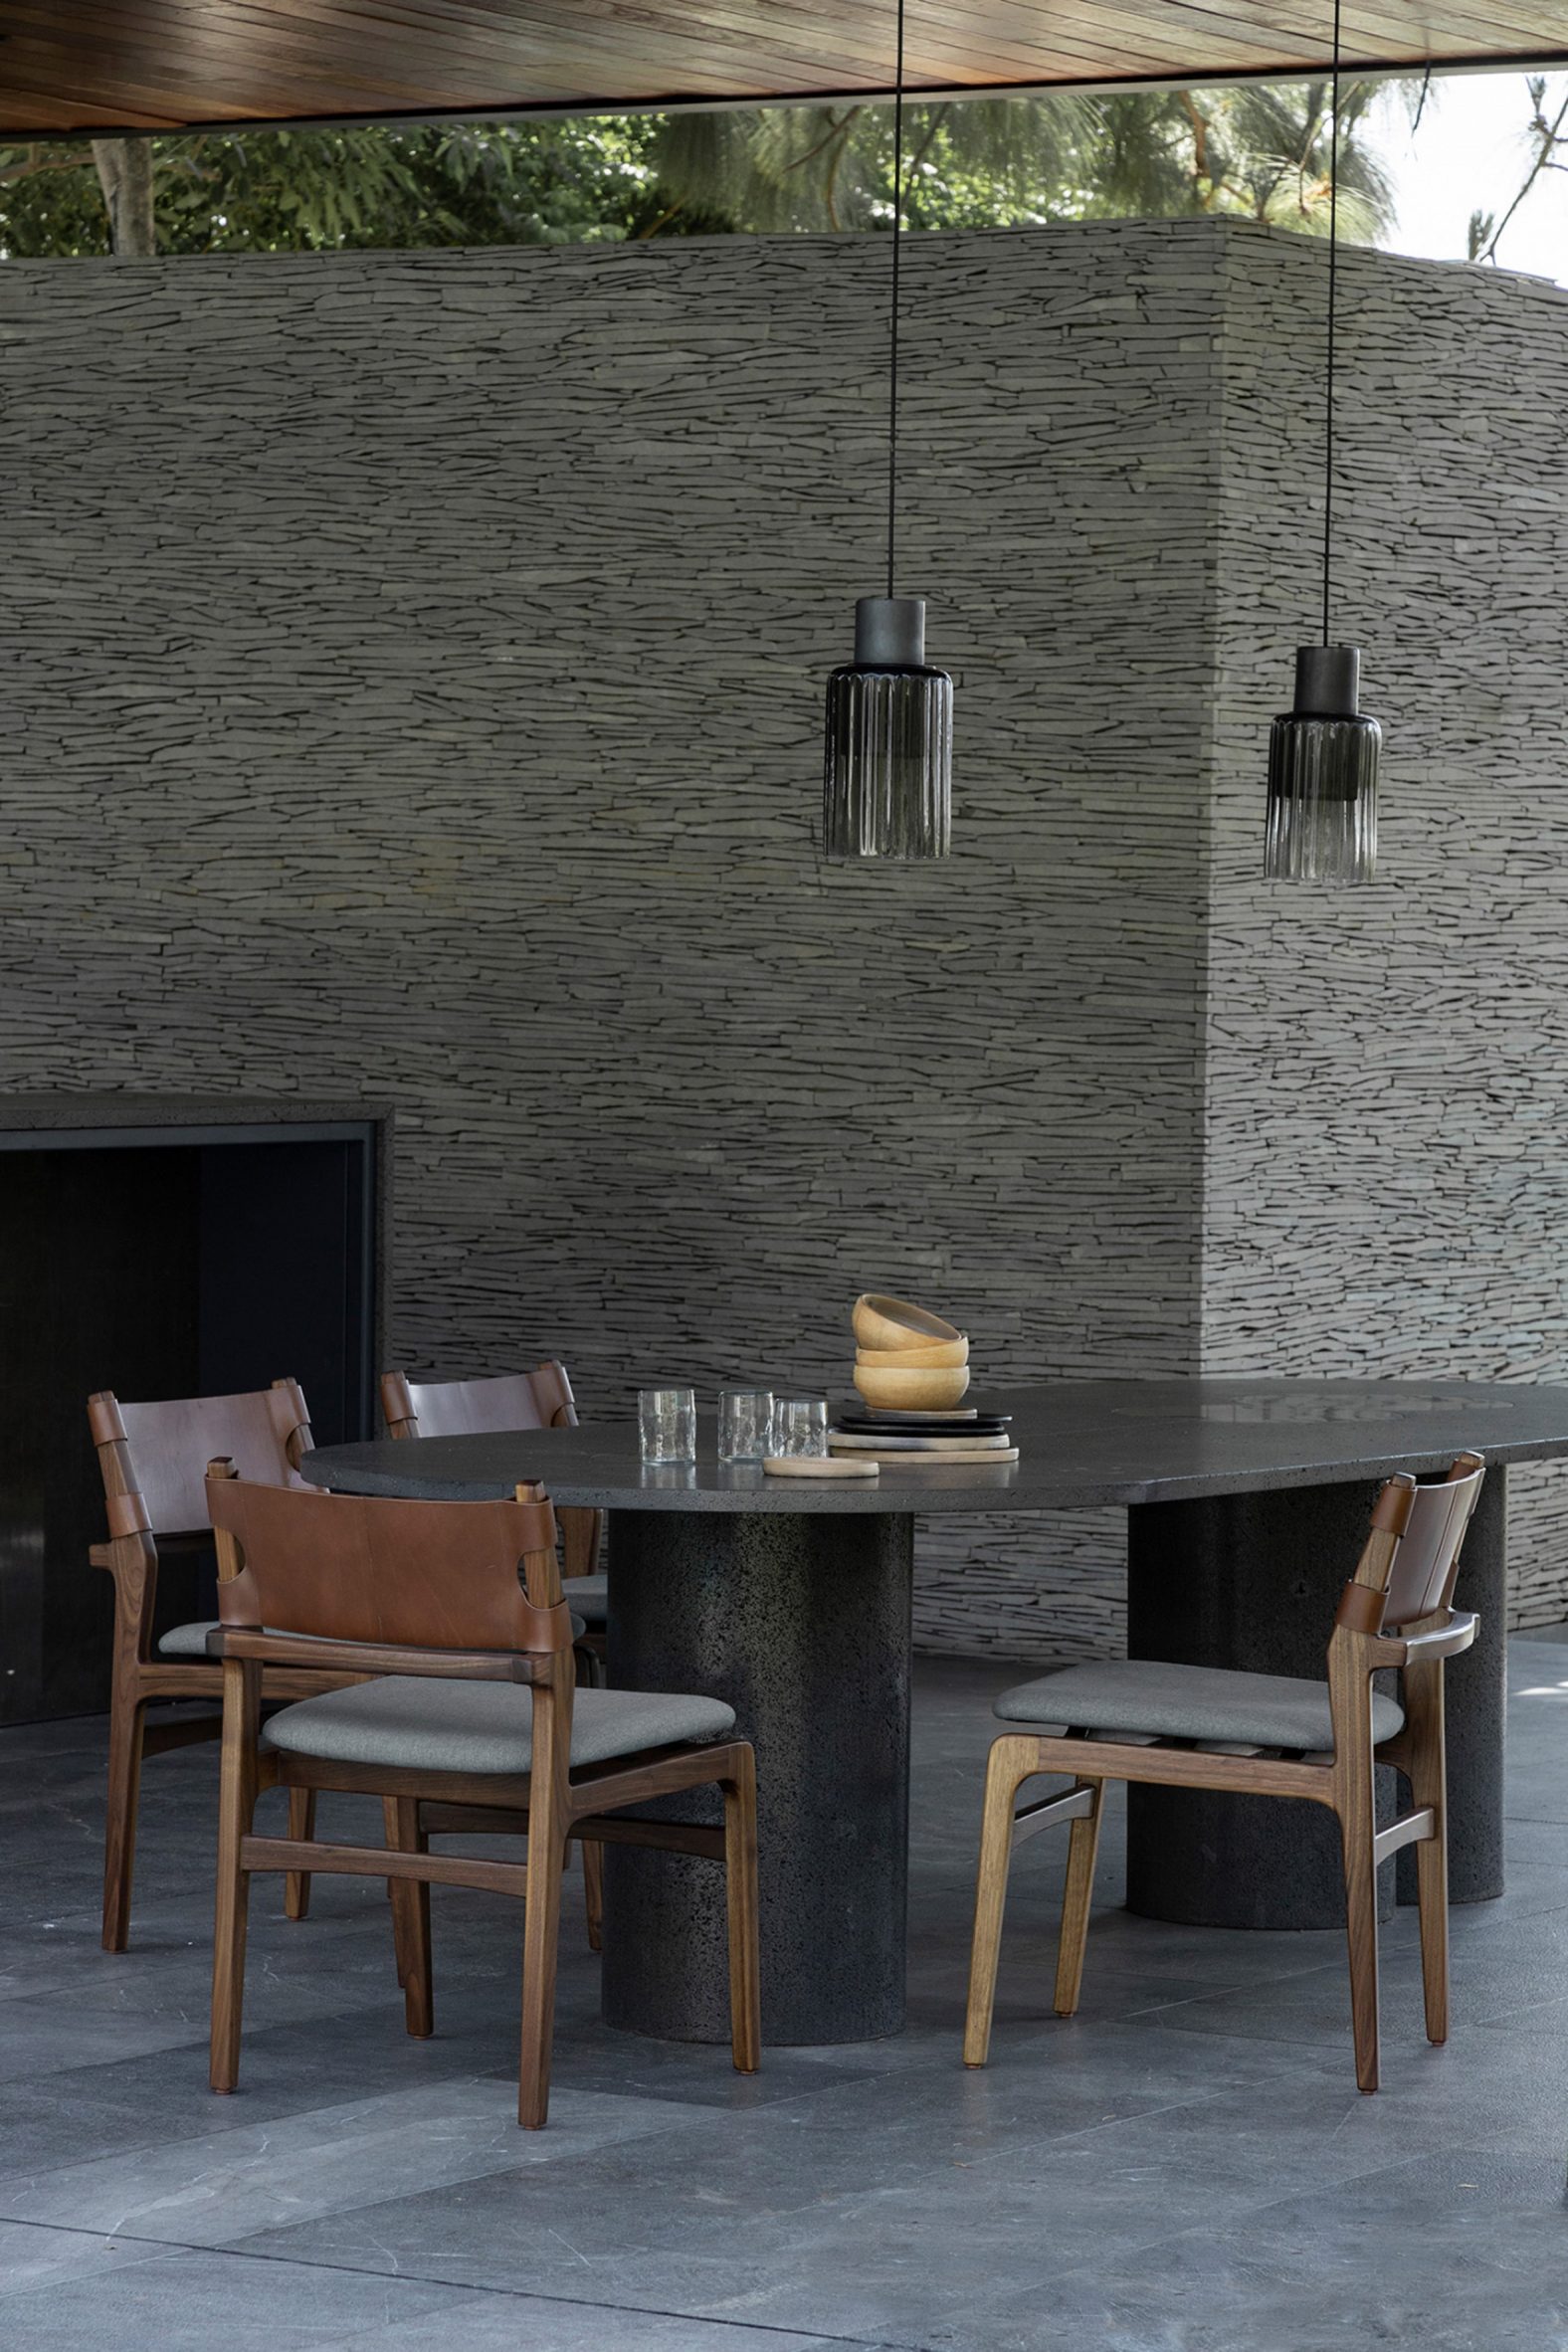 Barro pendant lamp over an outdoor dining table